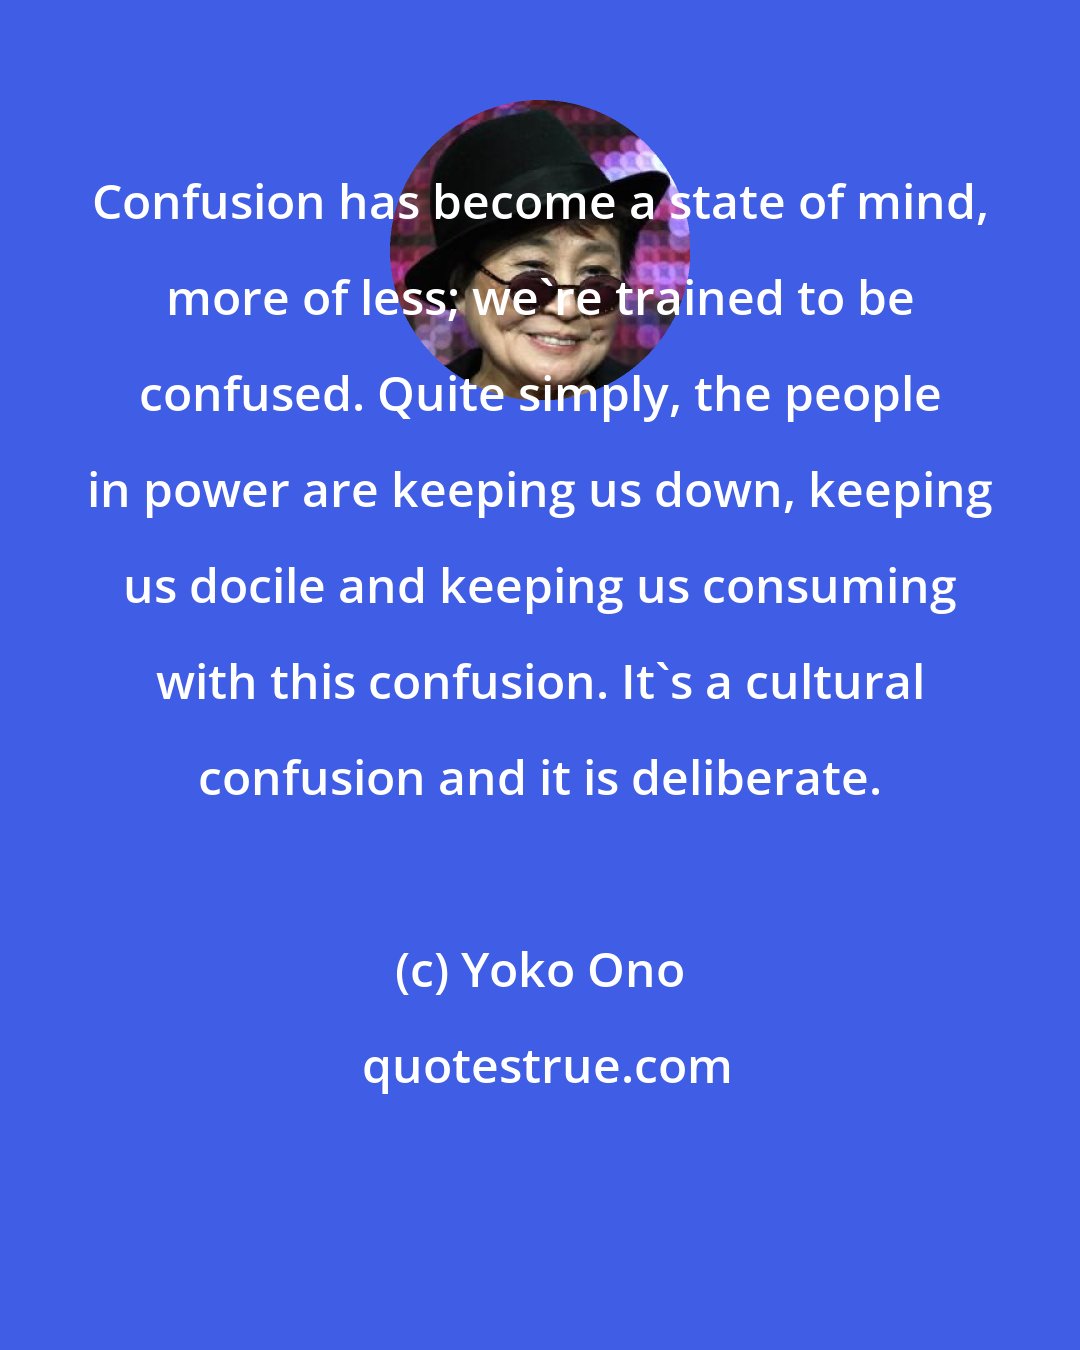 Yoko Ono: Confusion has become a state of mind, more of less; we're trained to be confused. Quite simply, the people in power are keeping us down, keeping us docile and keeping us consuming with this confusion. It's a cultural confusion and it is deliberate.